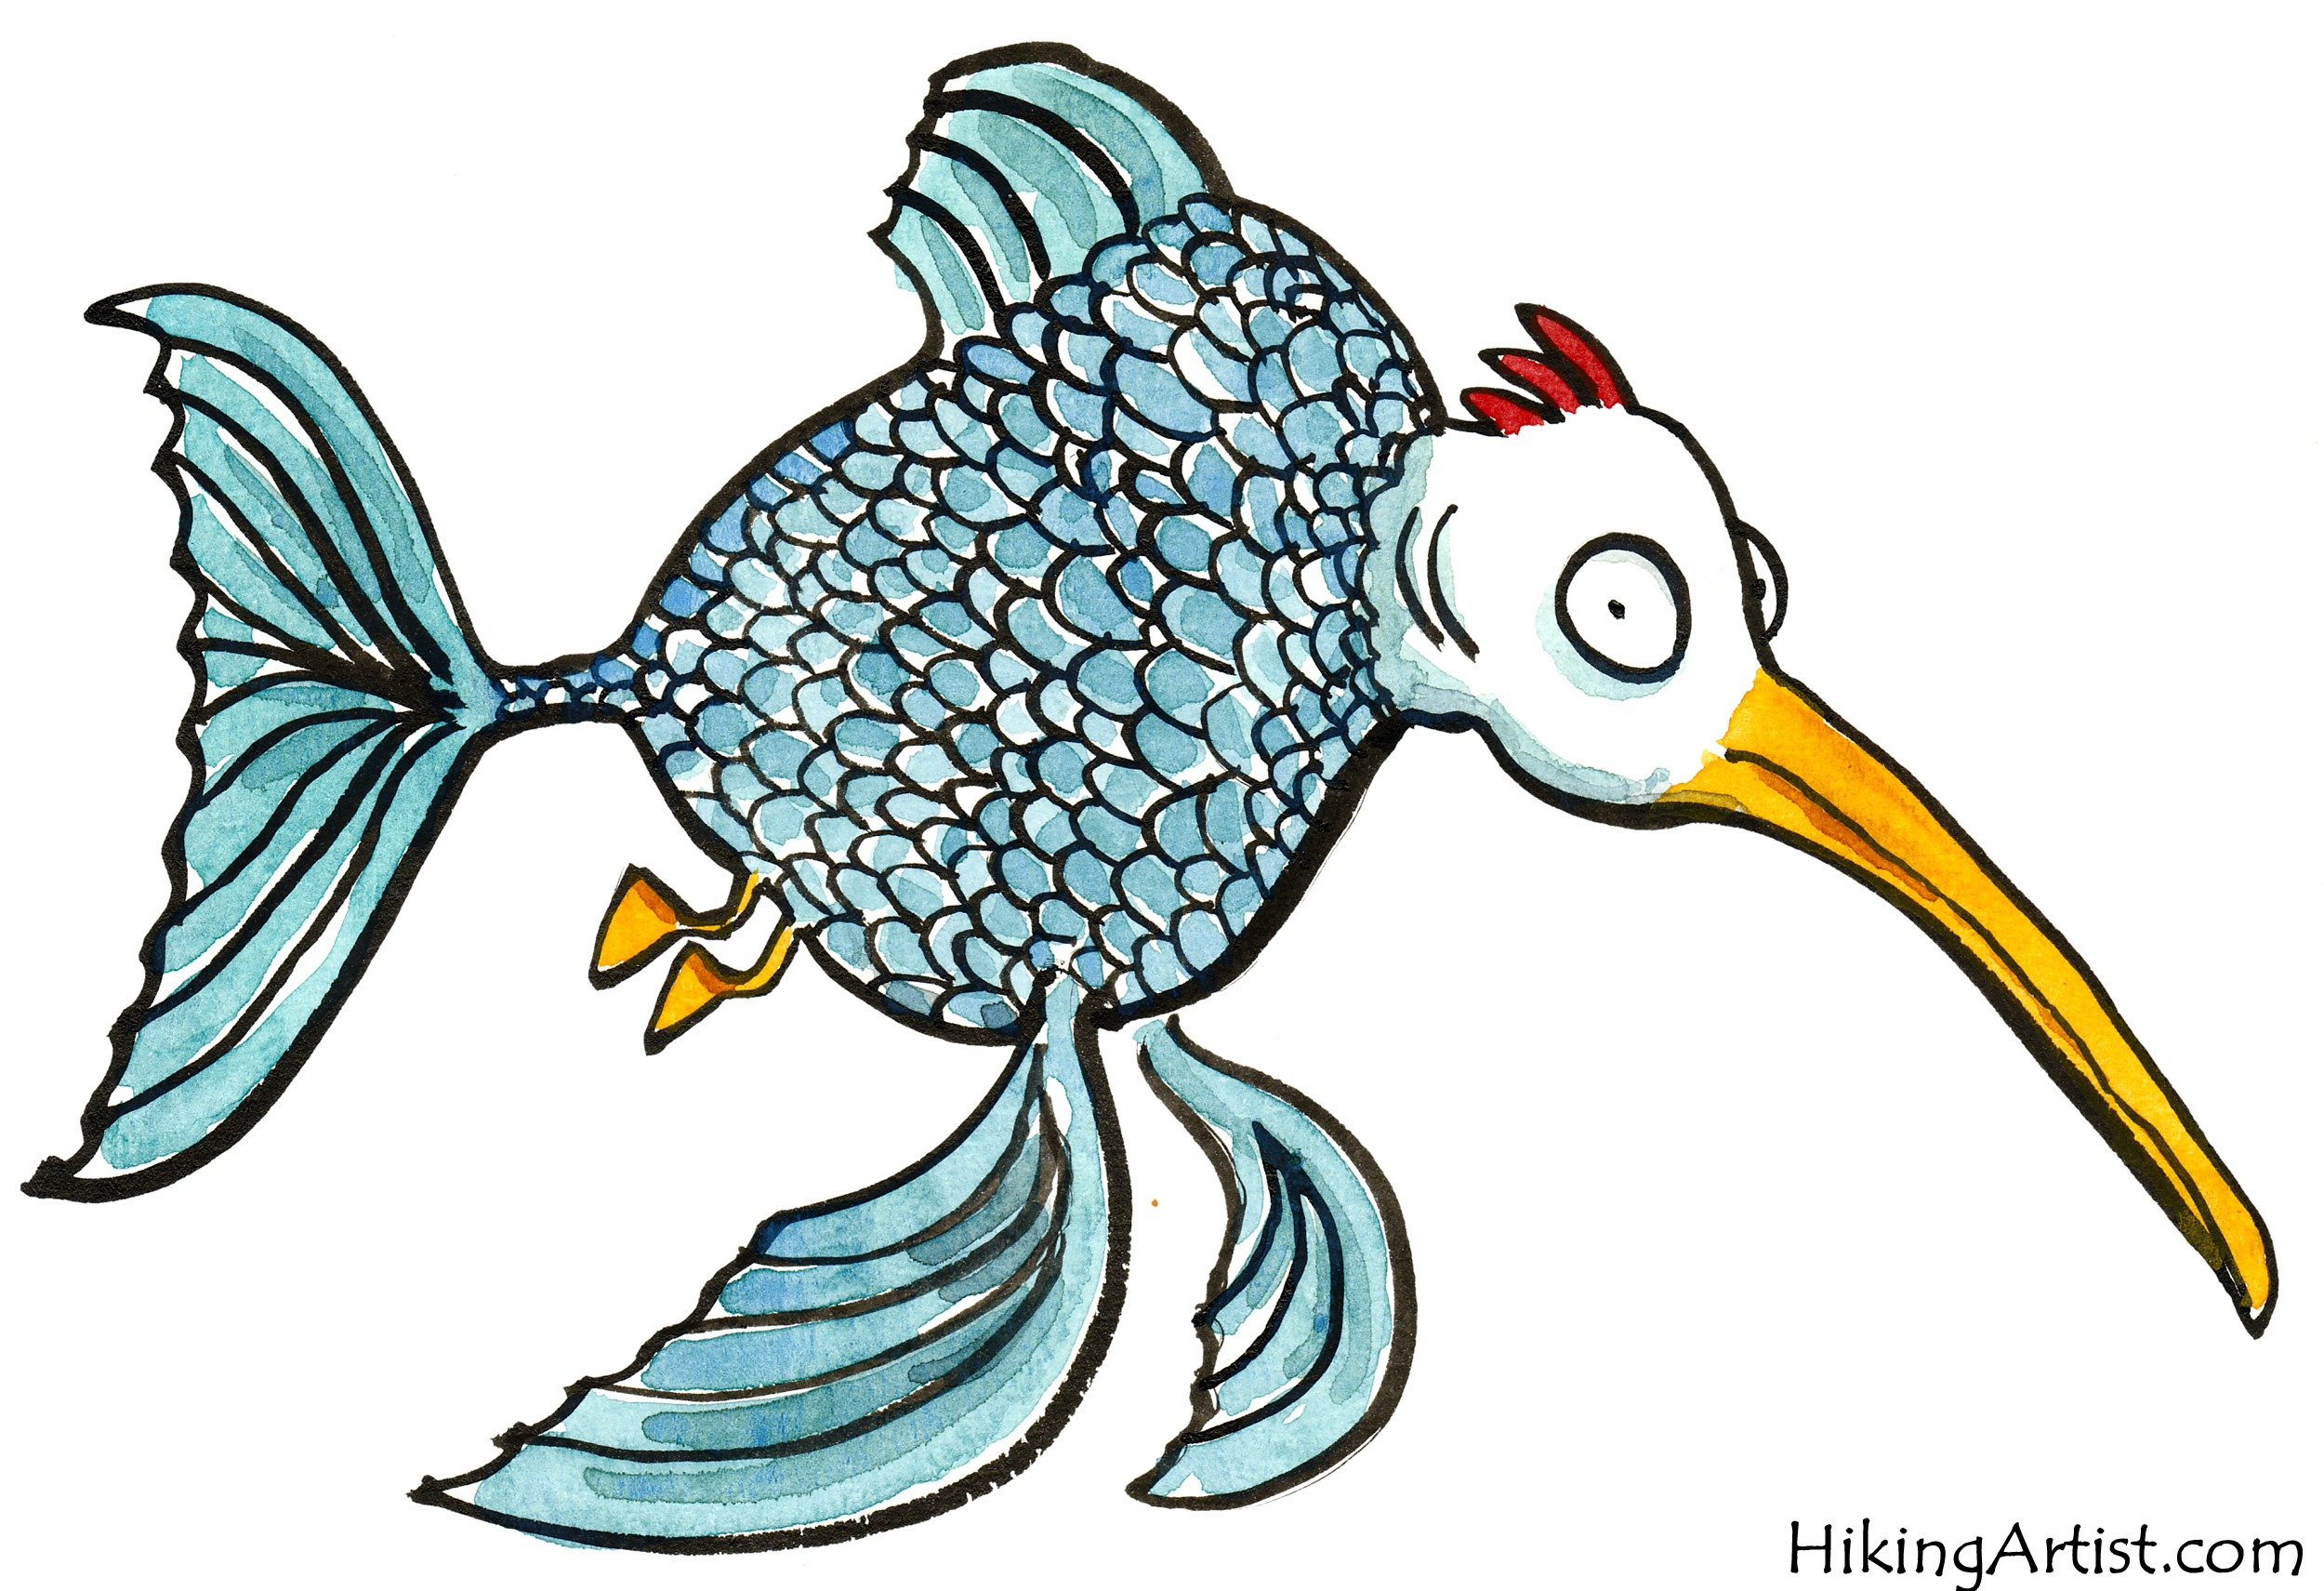 fish-fowl2by-HikingArtist | My art, thoughts and Notes